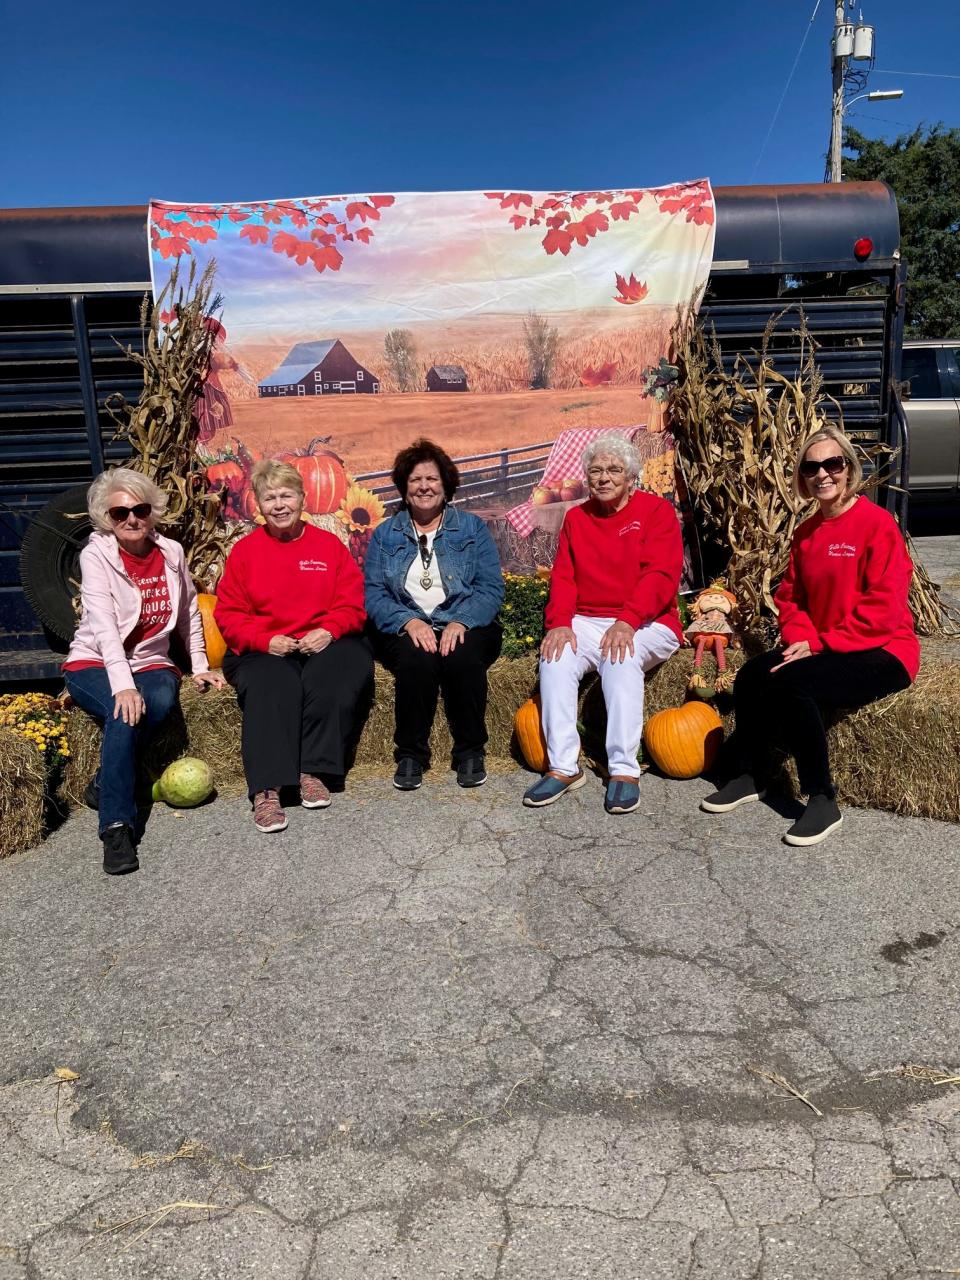 Officers of the Halls Crossroads Women's League make special events like the Farmers' Markets happen.